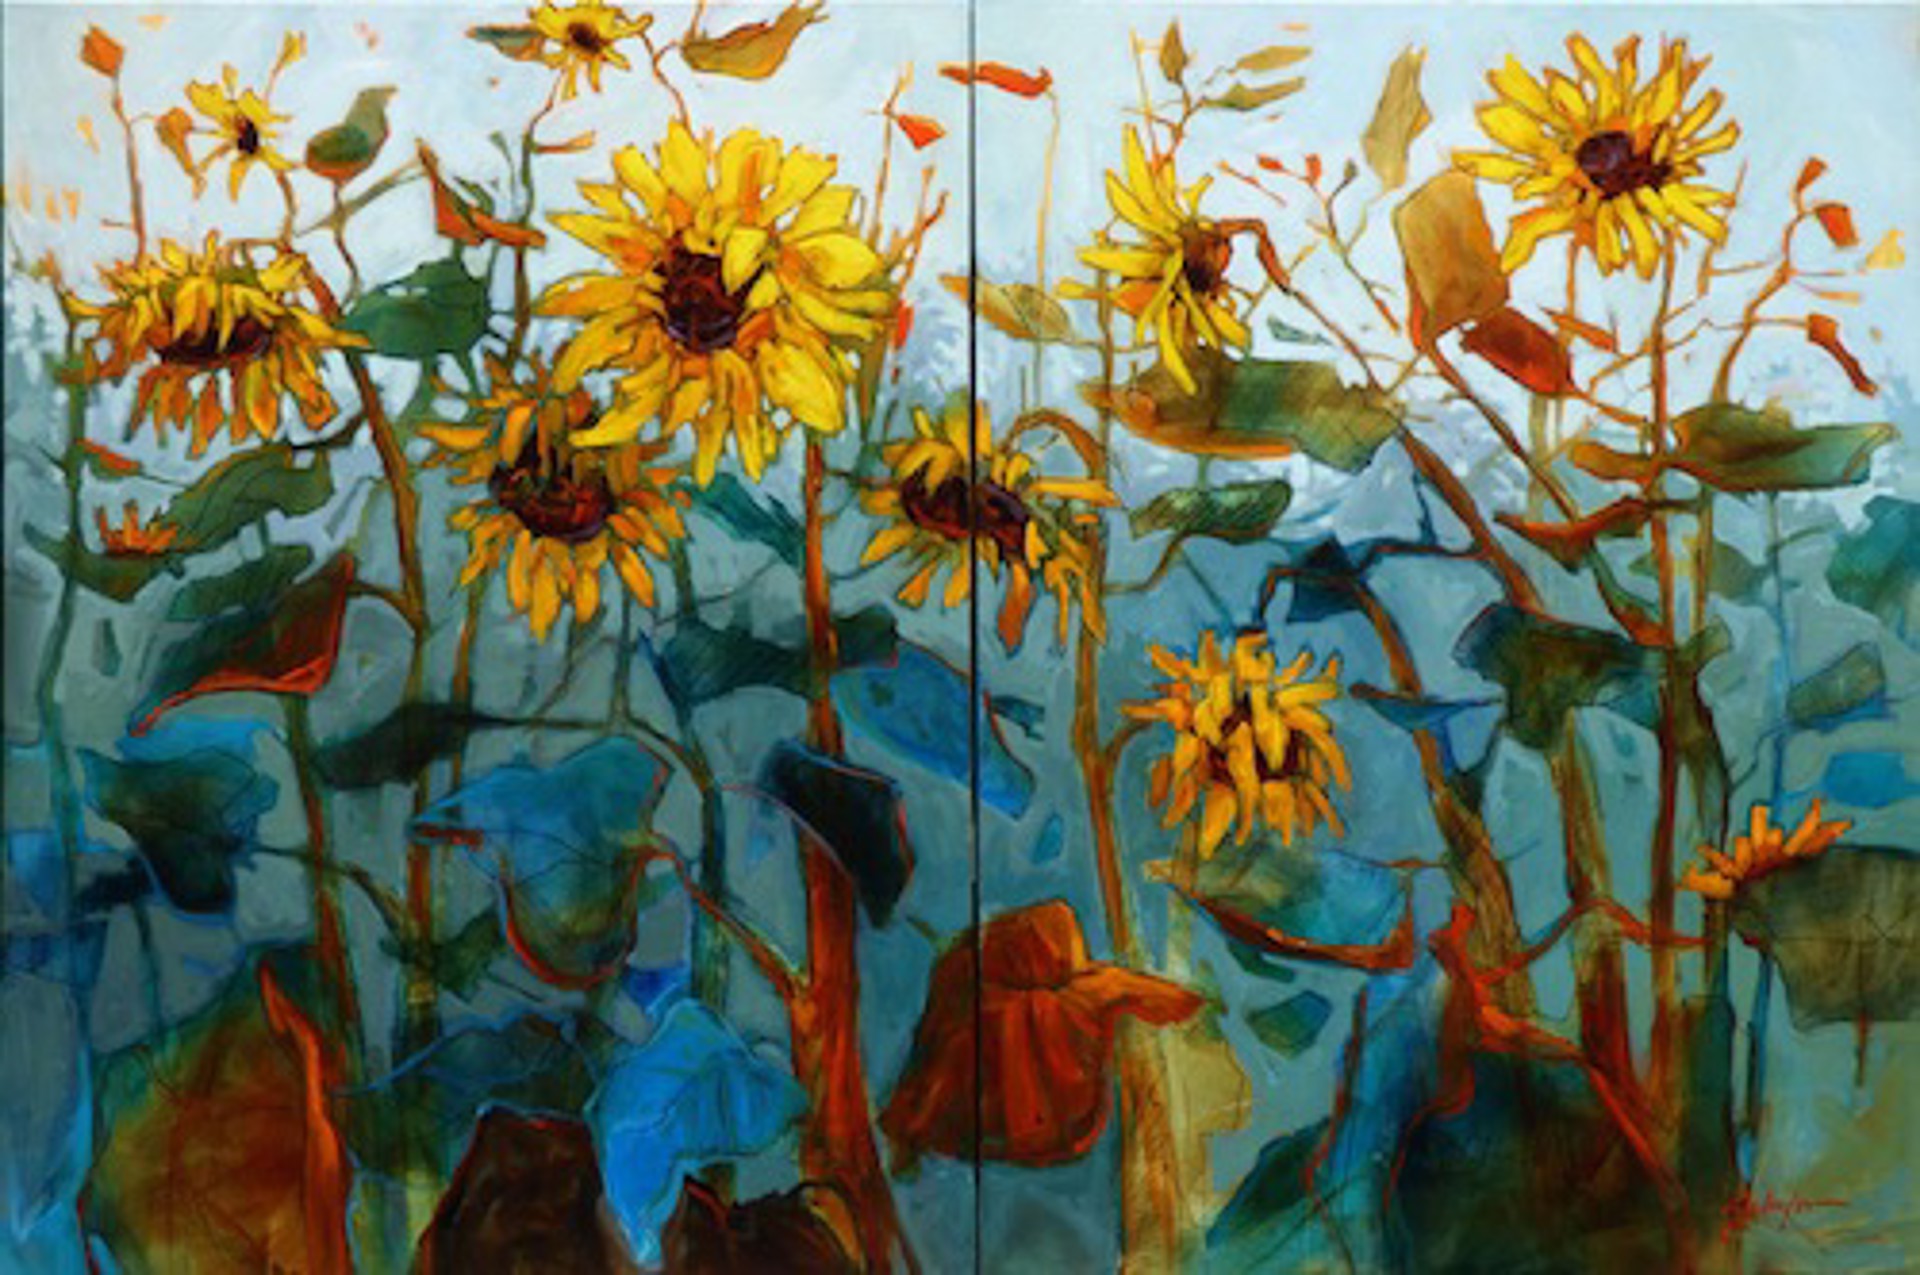 To Serve the Earth (diptych) by Gail Johnson